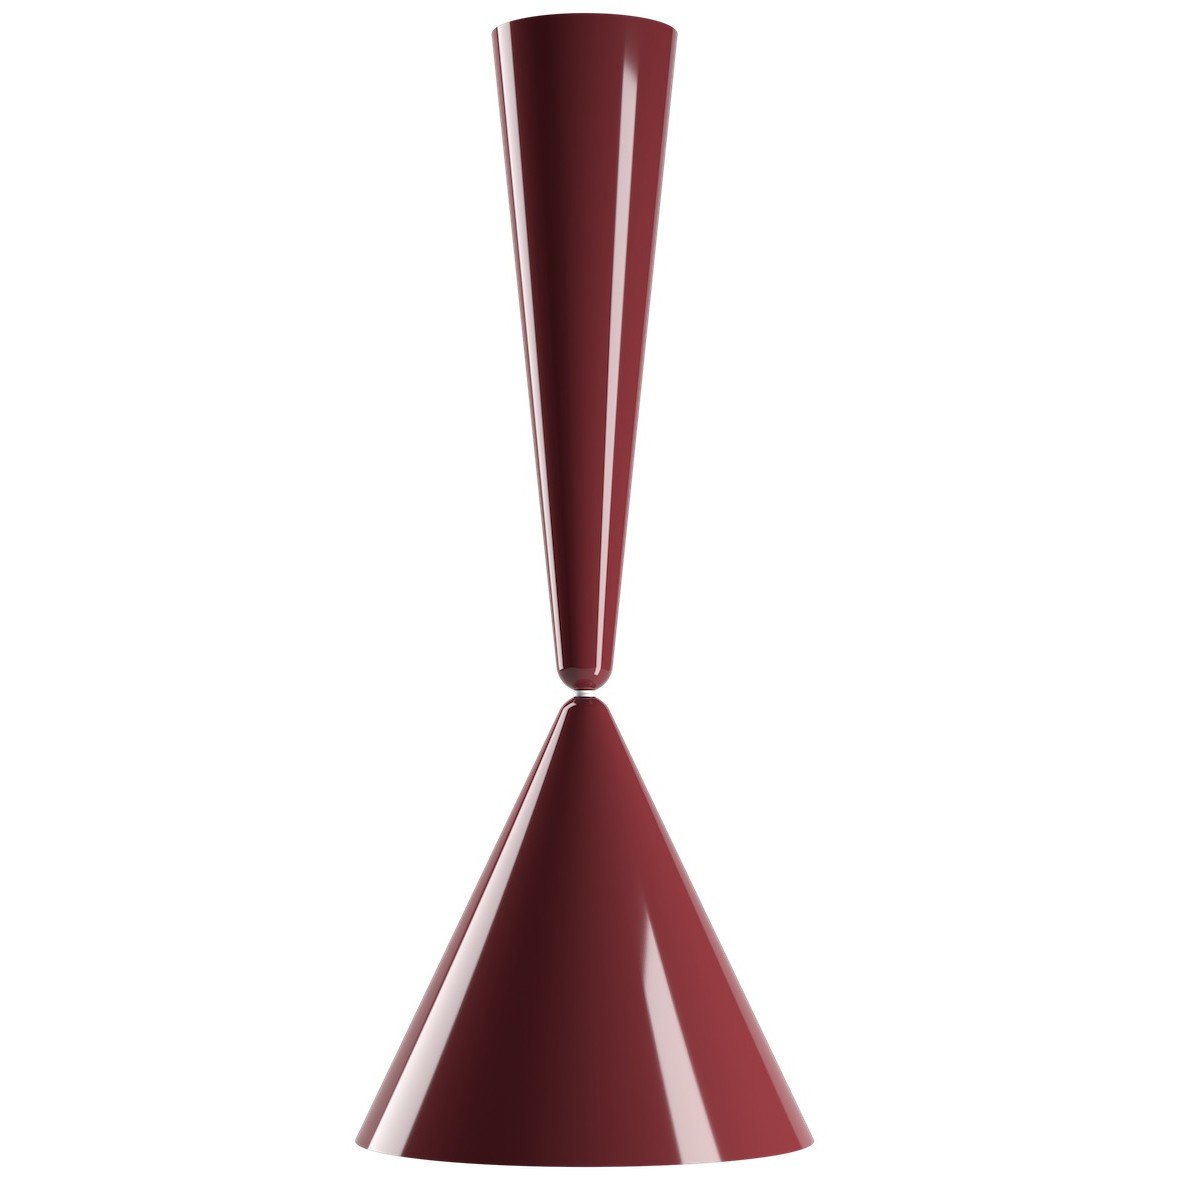 Flos, Diabolo cherry red - OFFER